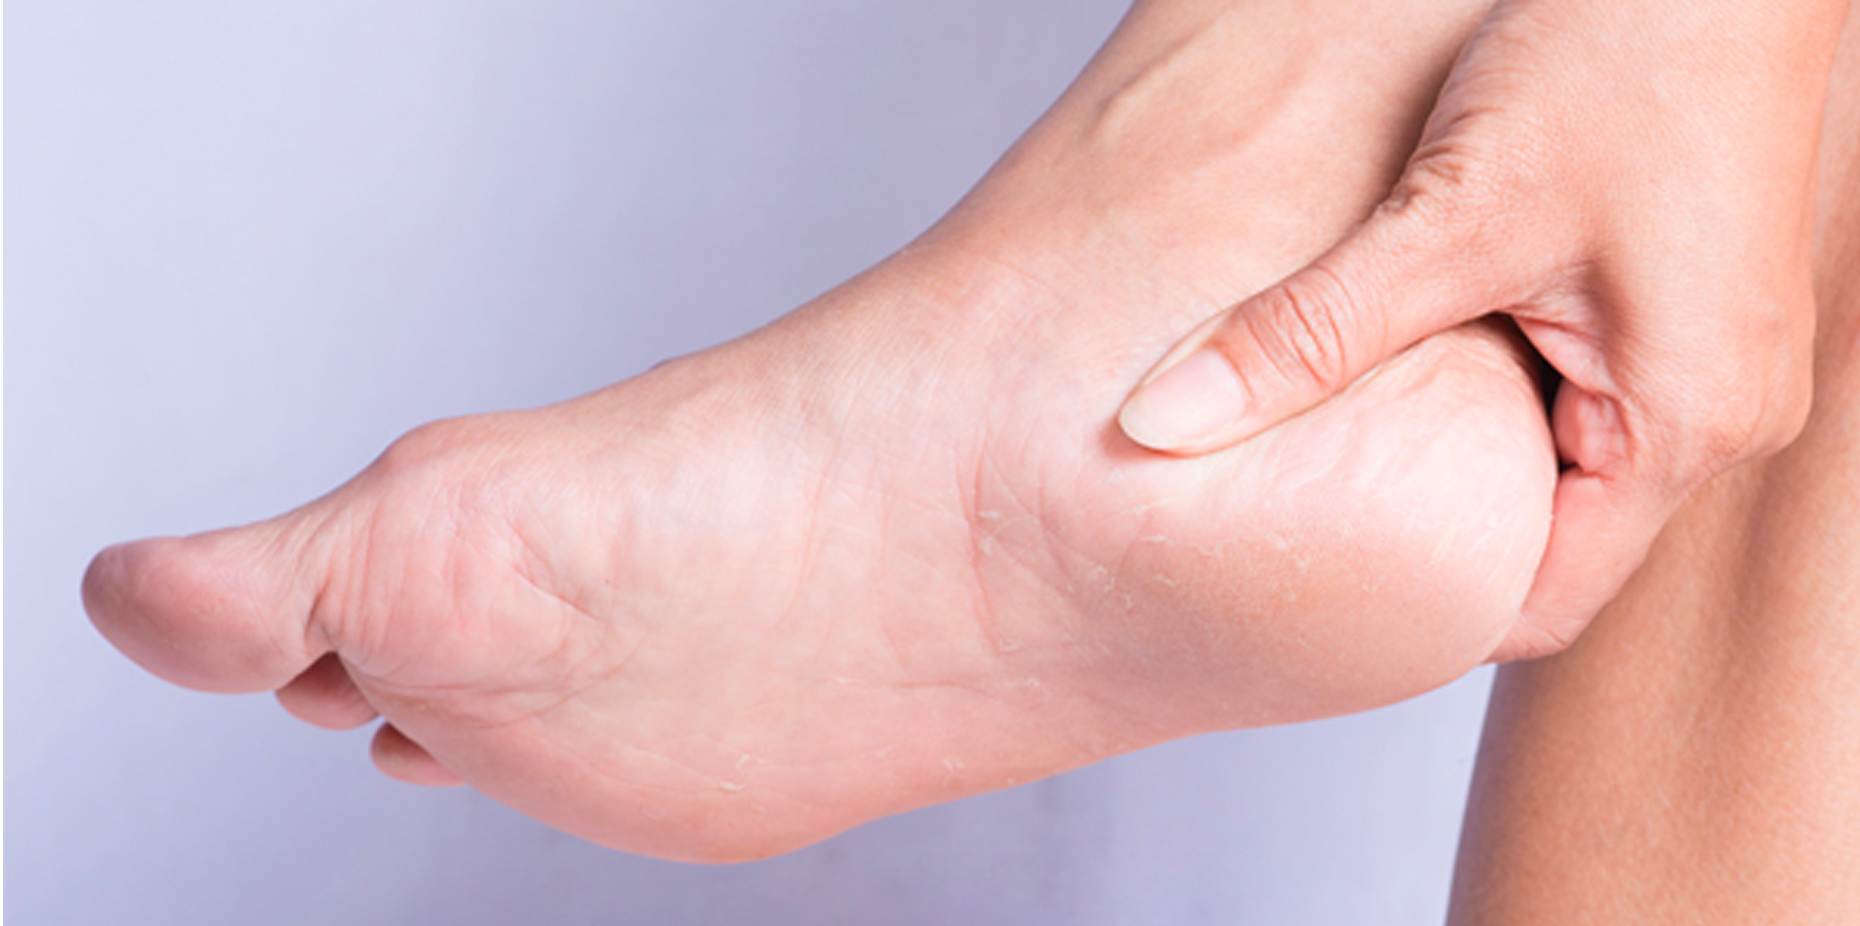 Tendonosis: Symptoms, Causes, Treatment, and More